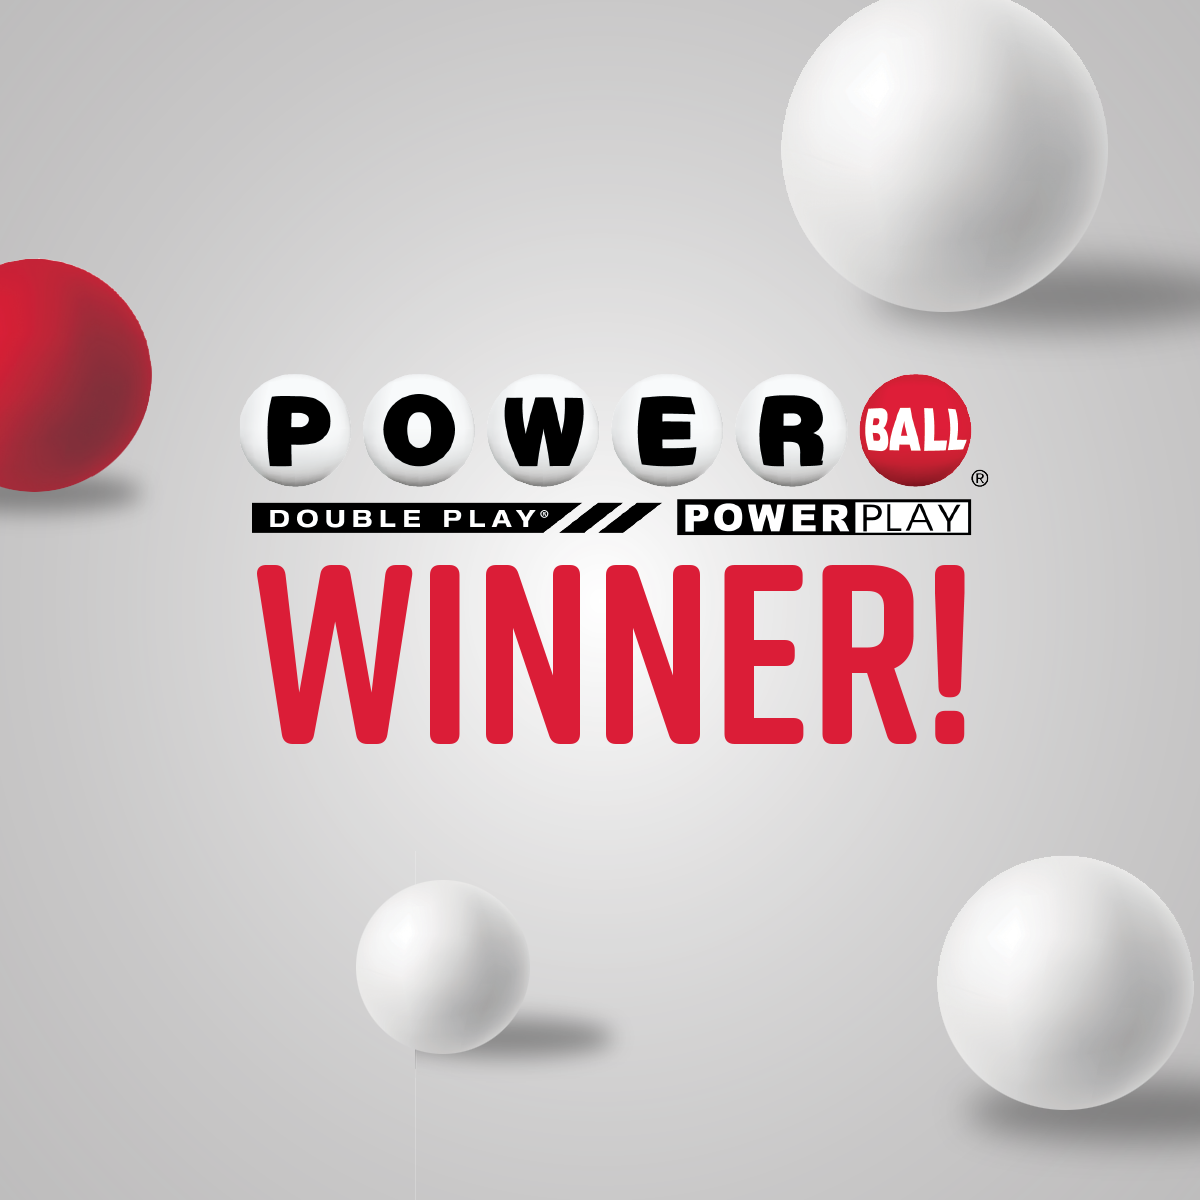 $50,000 Winning Powerball® Ticket Sold in Warsaw for Wednesday’s Drawing